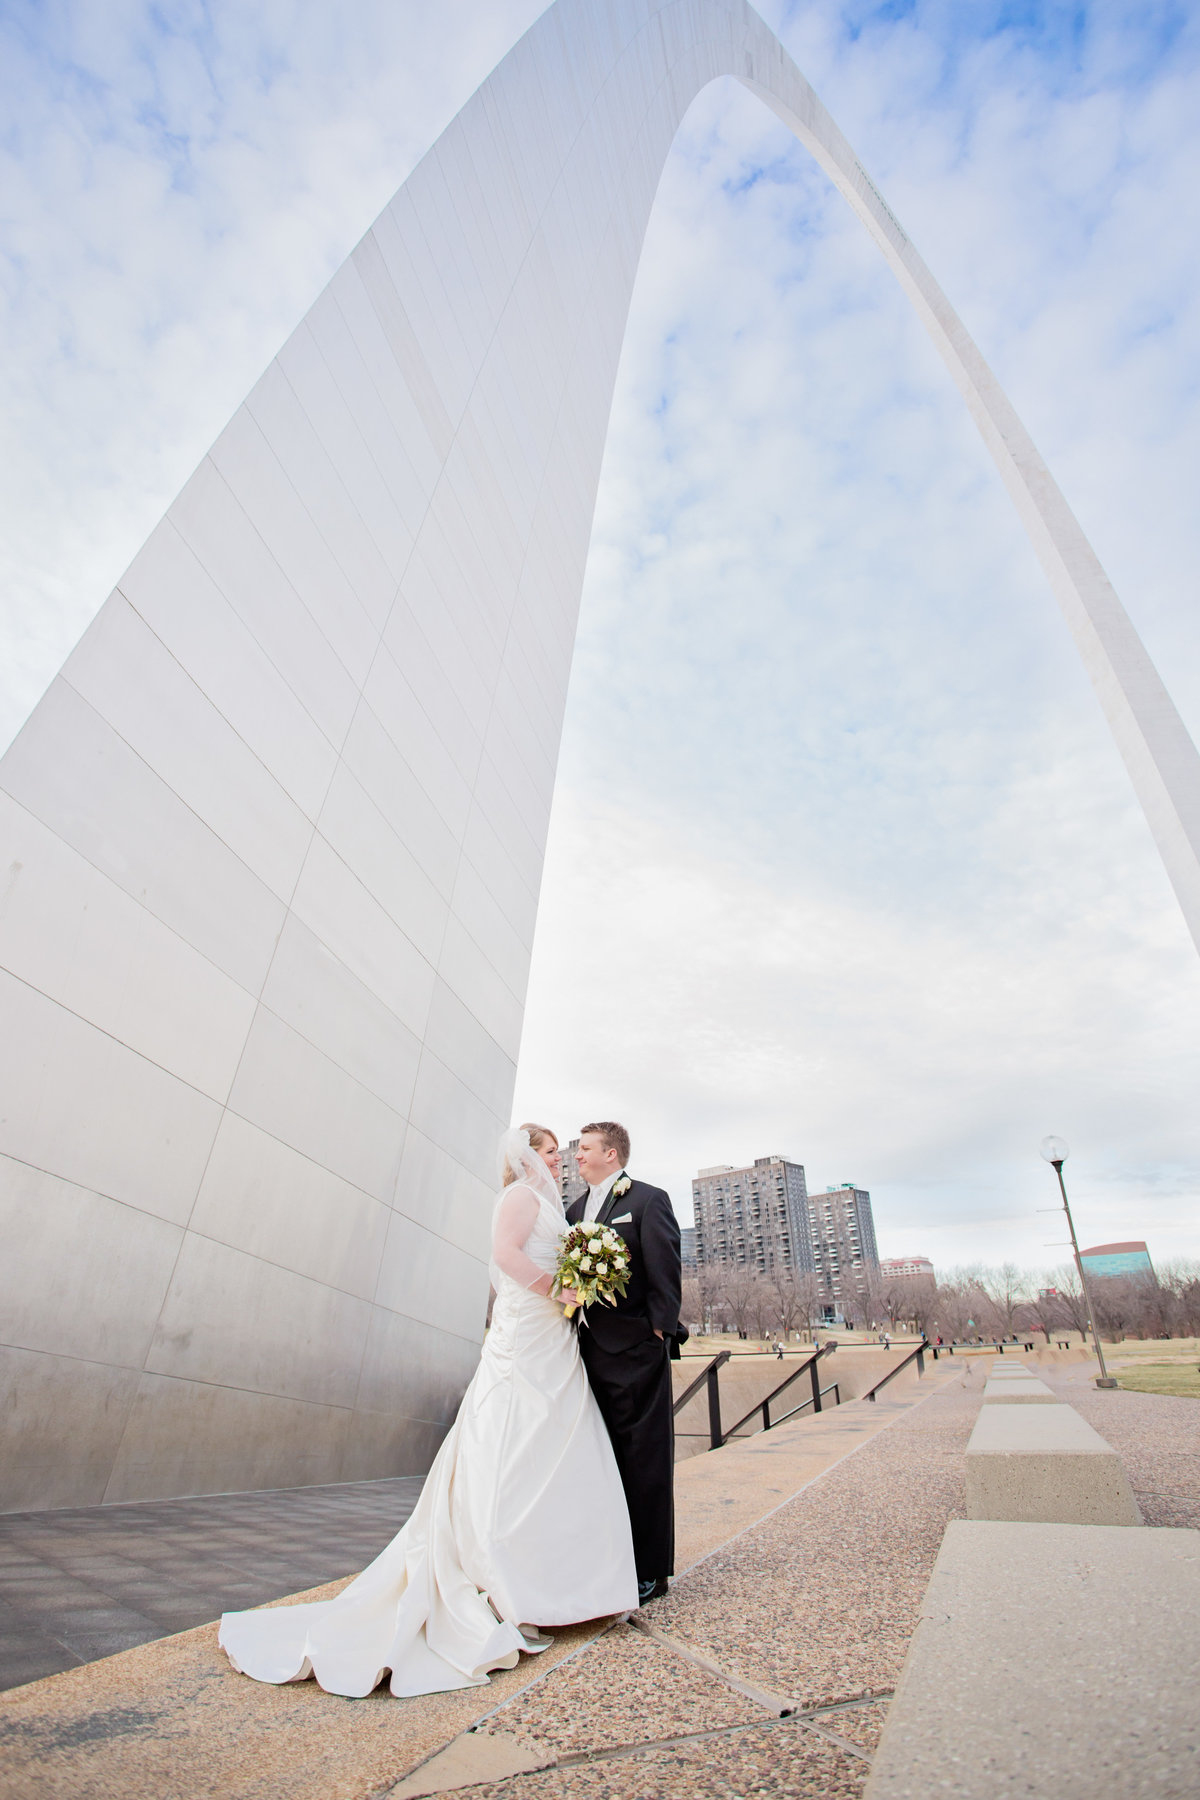 Weddings - Holly Dawn Photography - Wedding Photography - Family Photography - St. Charles - St. Louis - Missouri -31